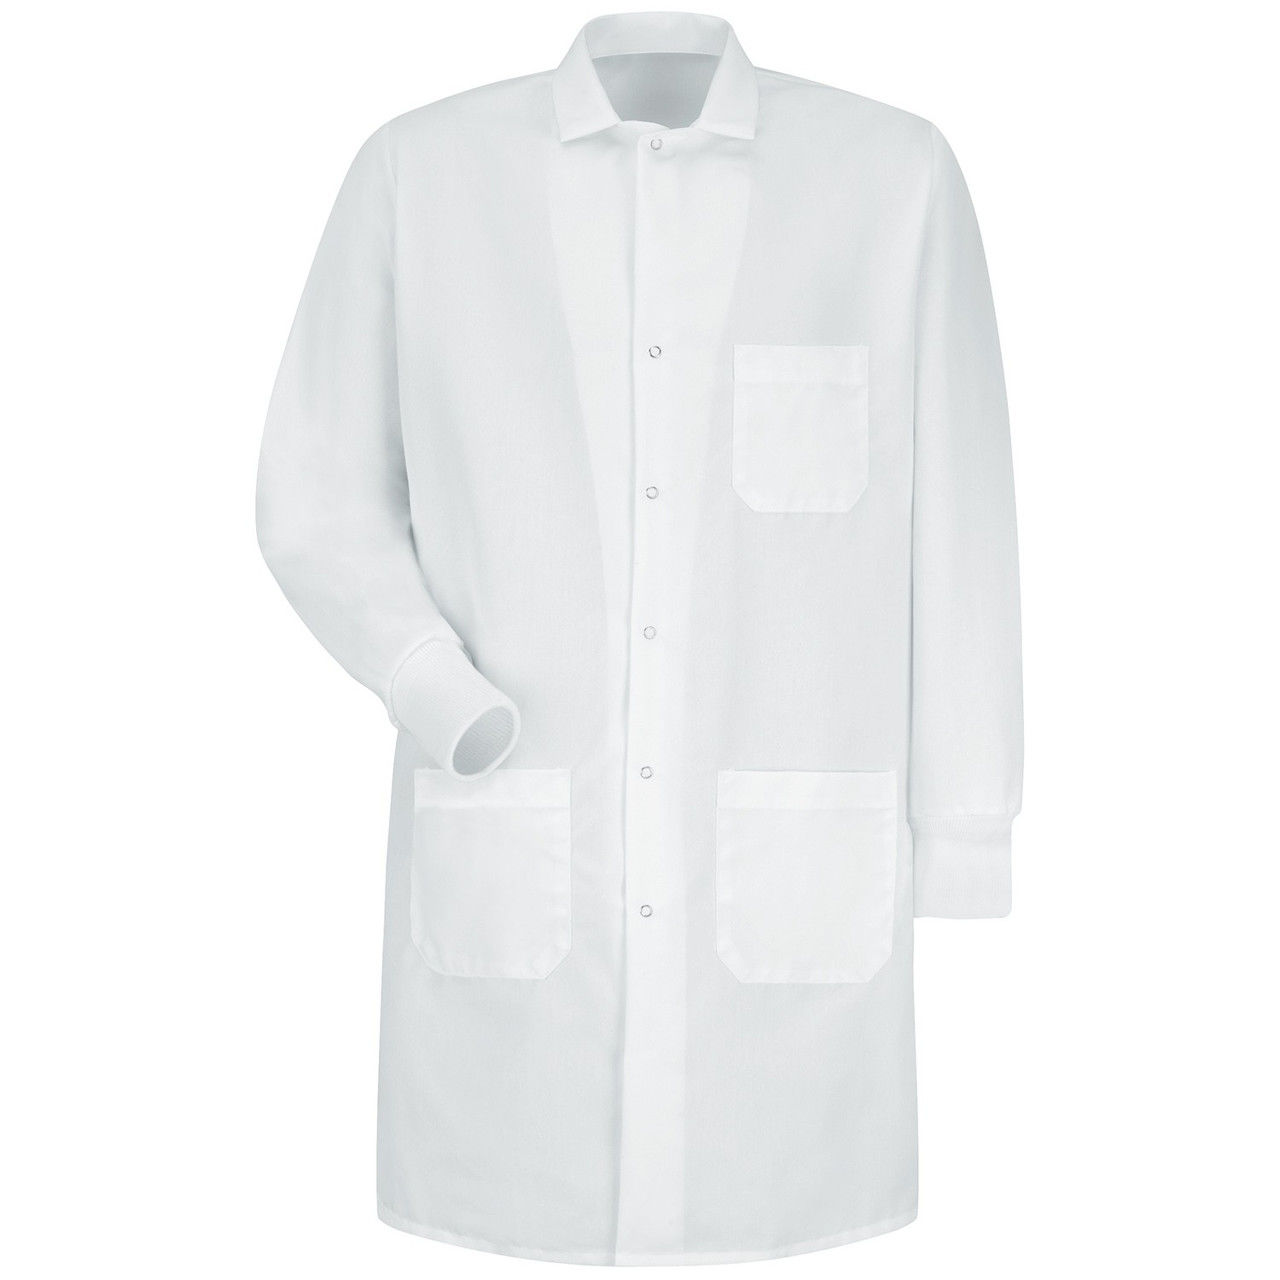 Does the cuffed lab coat have a specific collar style?